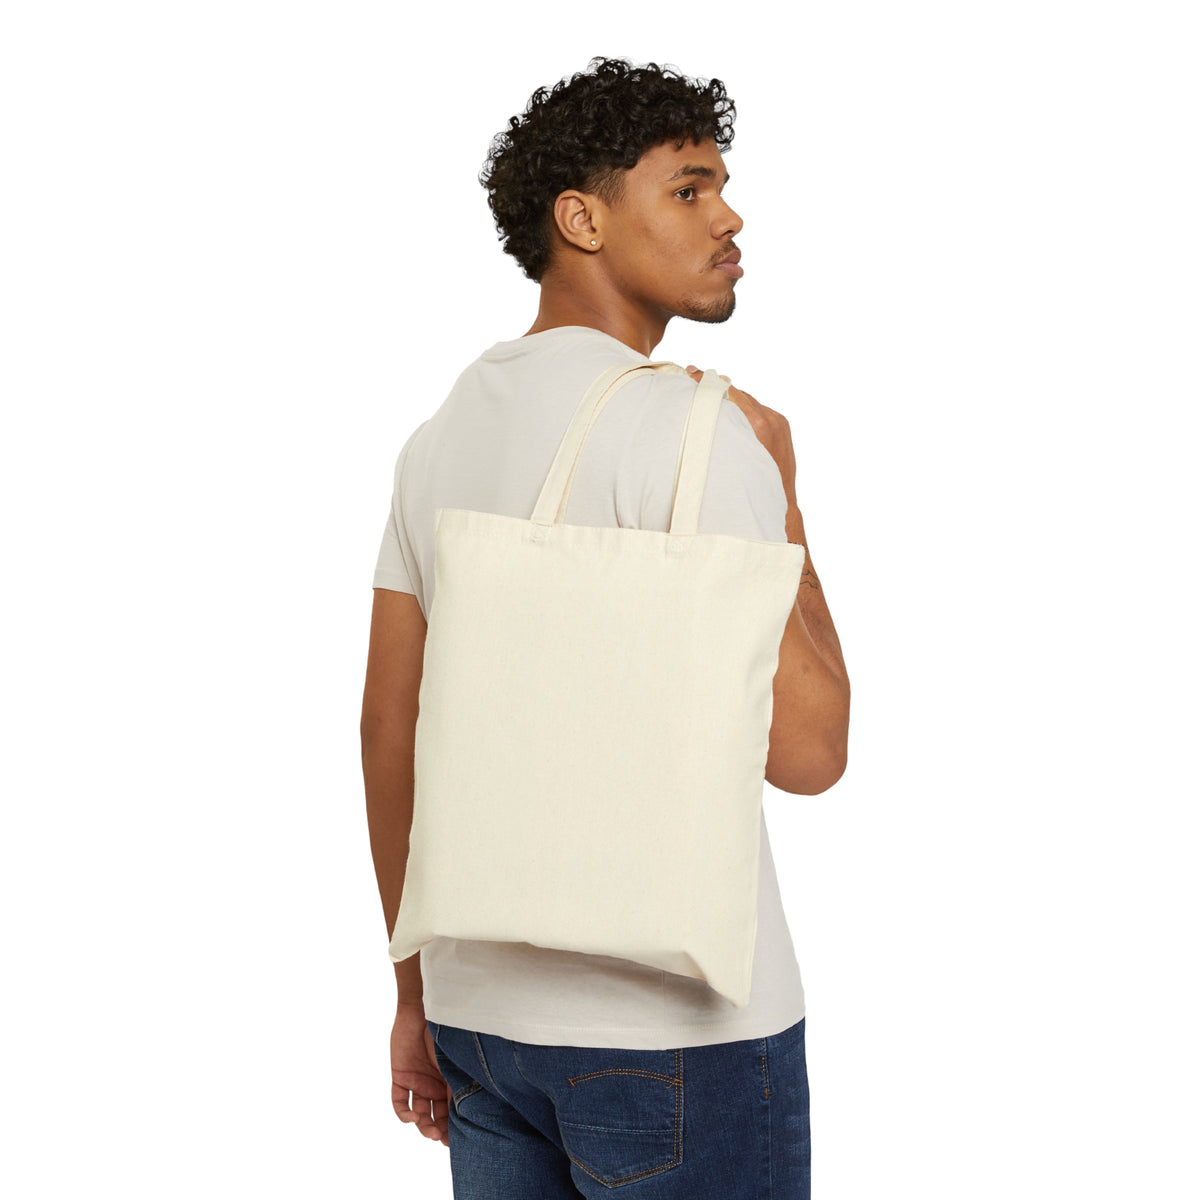 The Reformer Club Canvas Tote